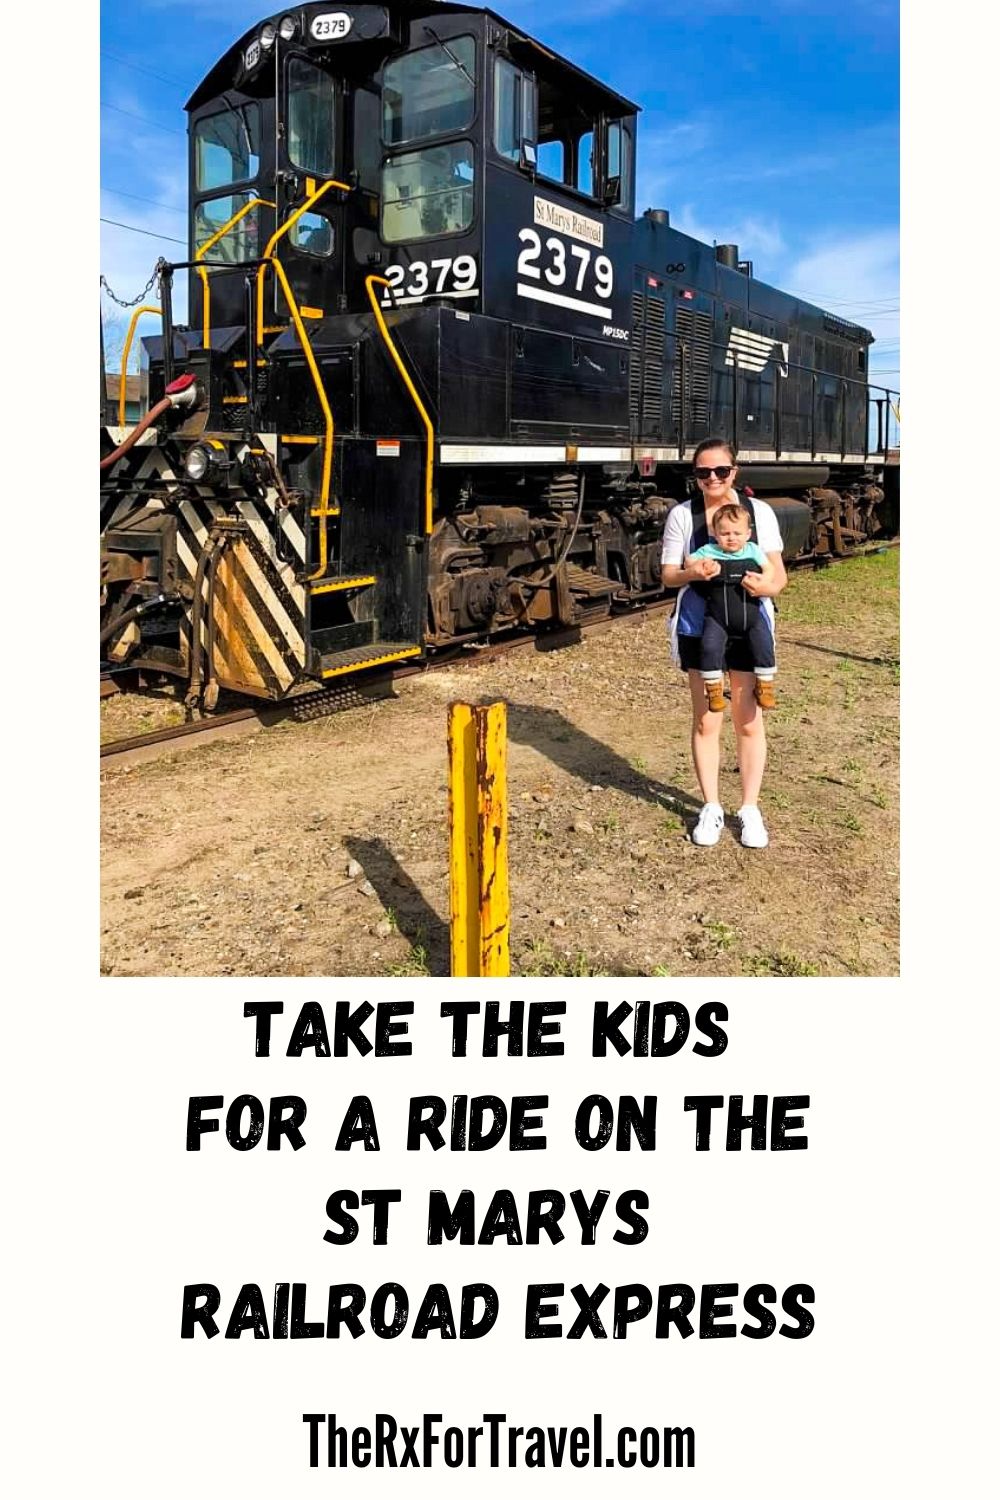 Take the kids for a fun themed ride on the St Marys Railroad Express here in Georgia